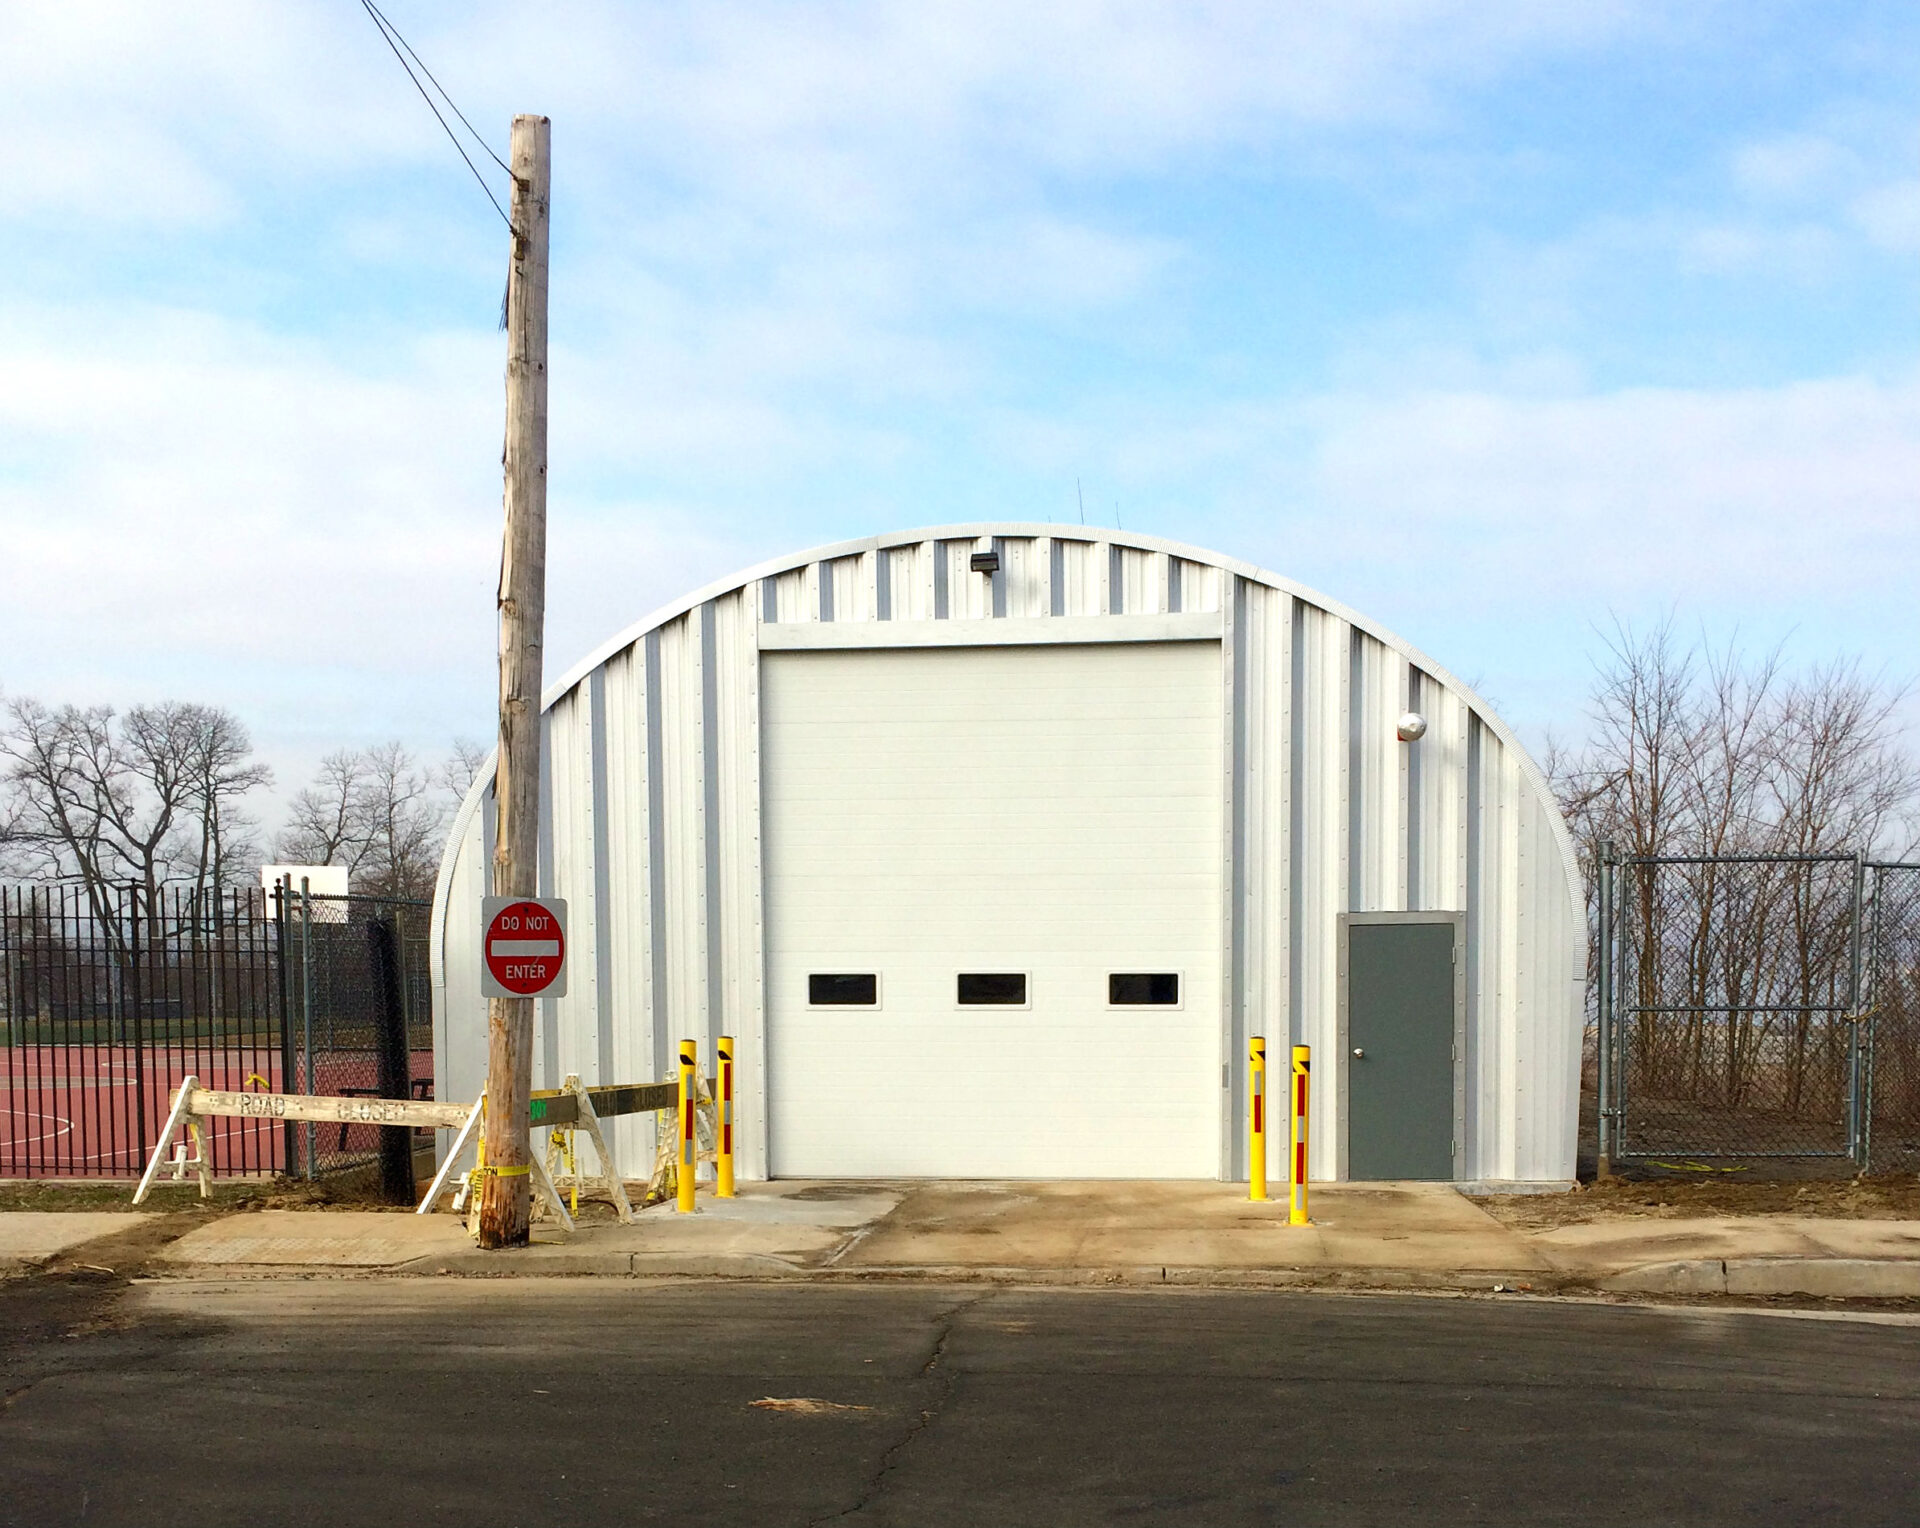 S model steel arch building with white garage door with three windows on it and a walk through door used at fire department in NY